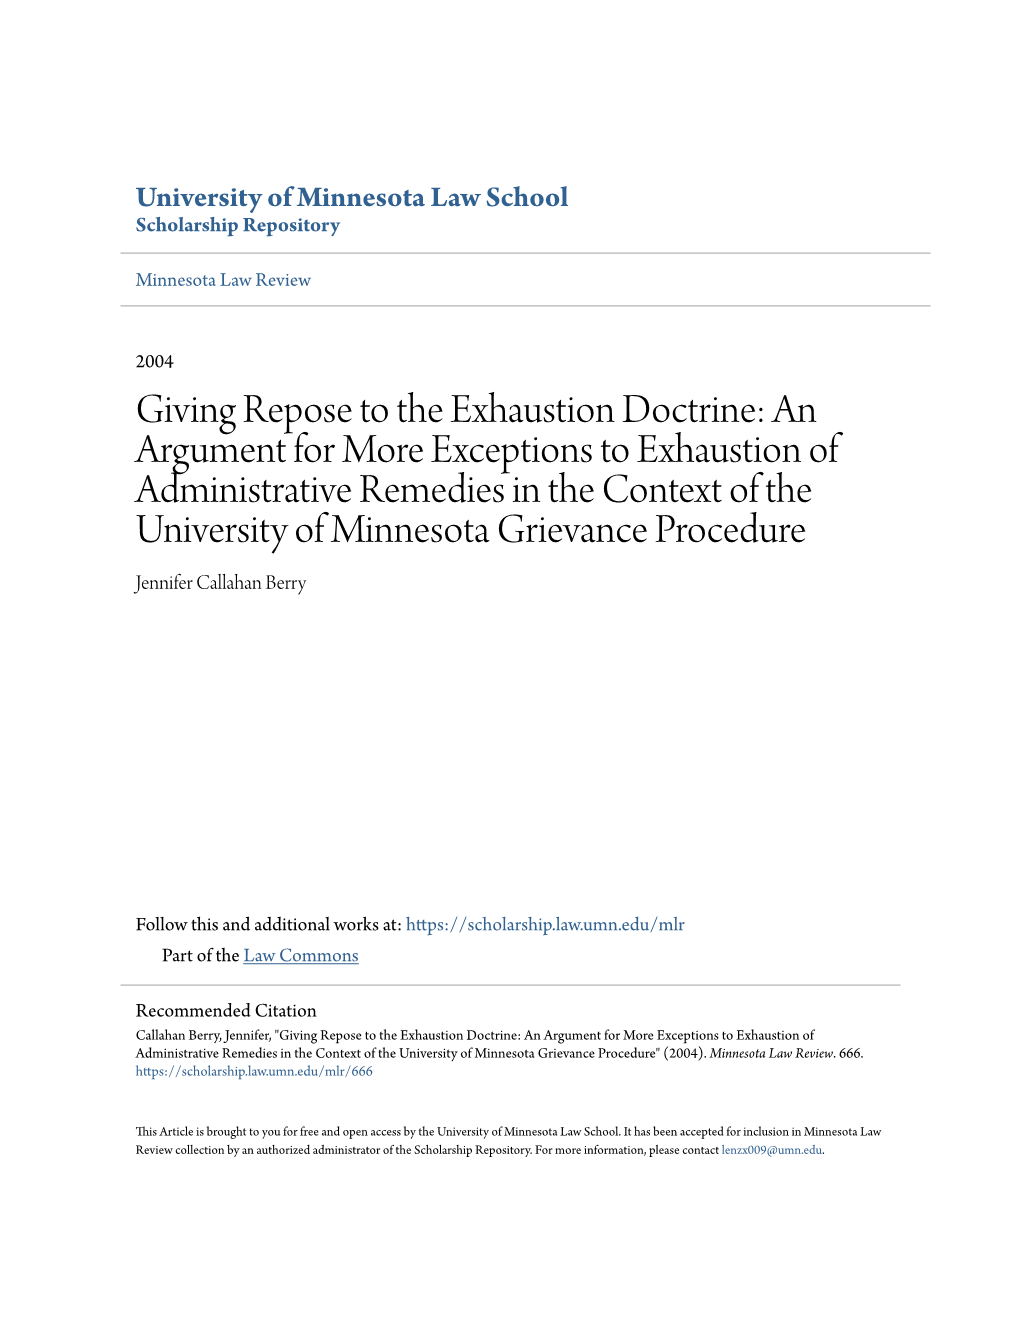 An Argument for More Exceptions to Exhaustion of Administrative Remedies in the Context of the University of Minnesota Grievance Procedure Jennifer Callahan Berry